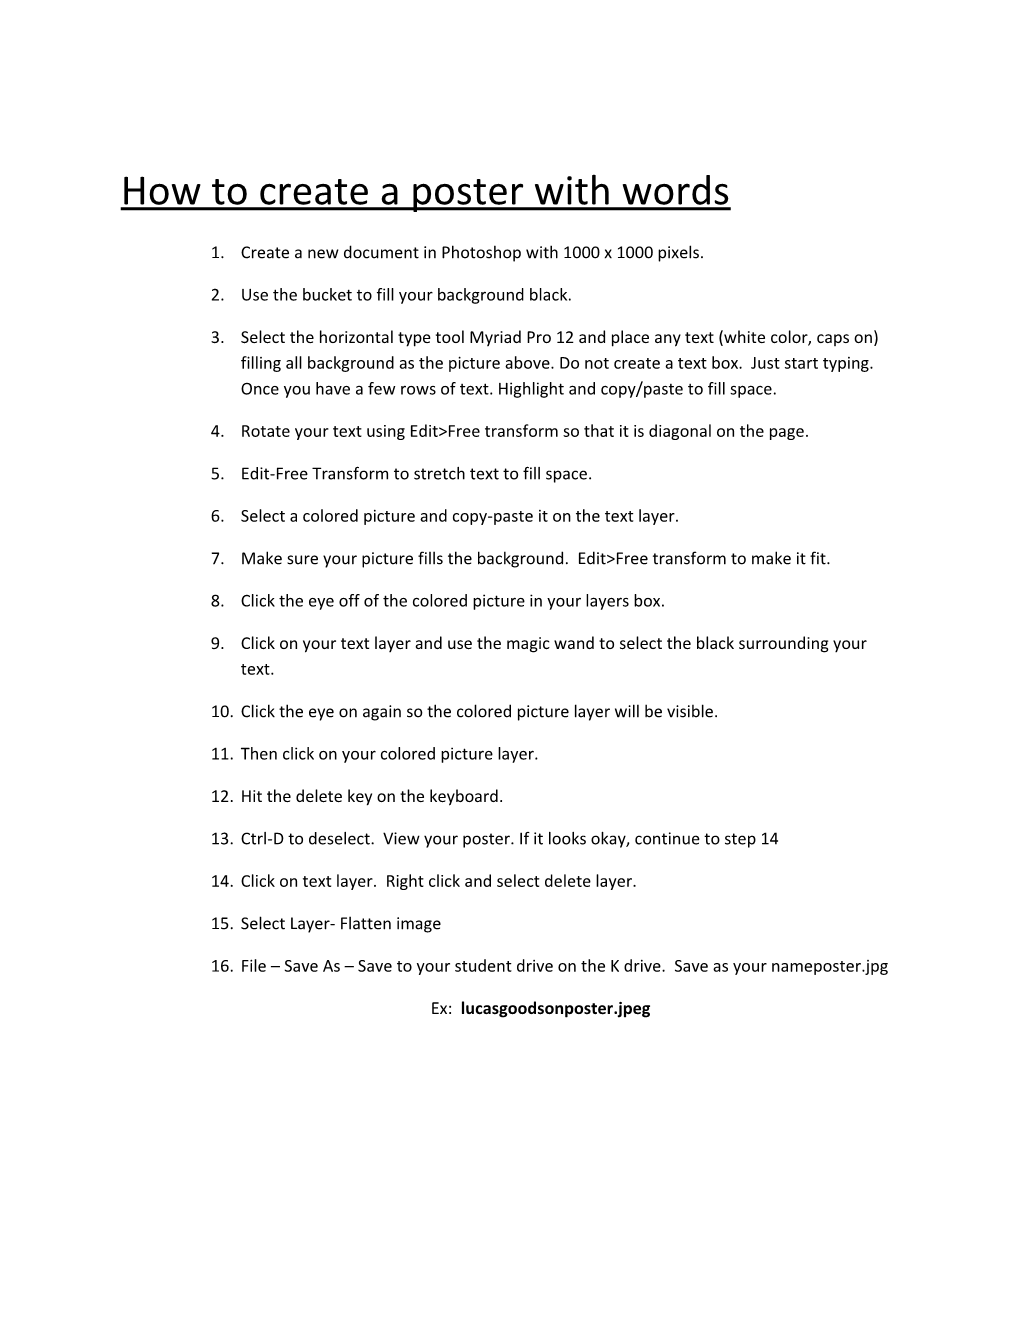 How to Create a Poster with Words